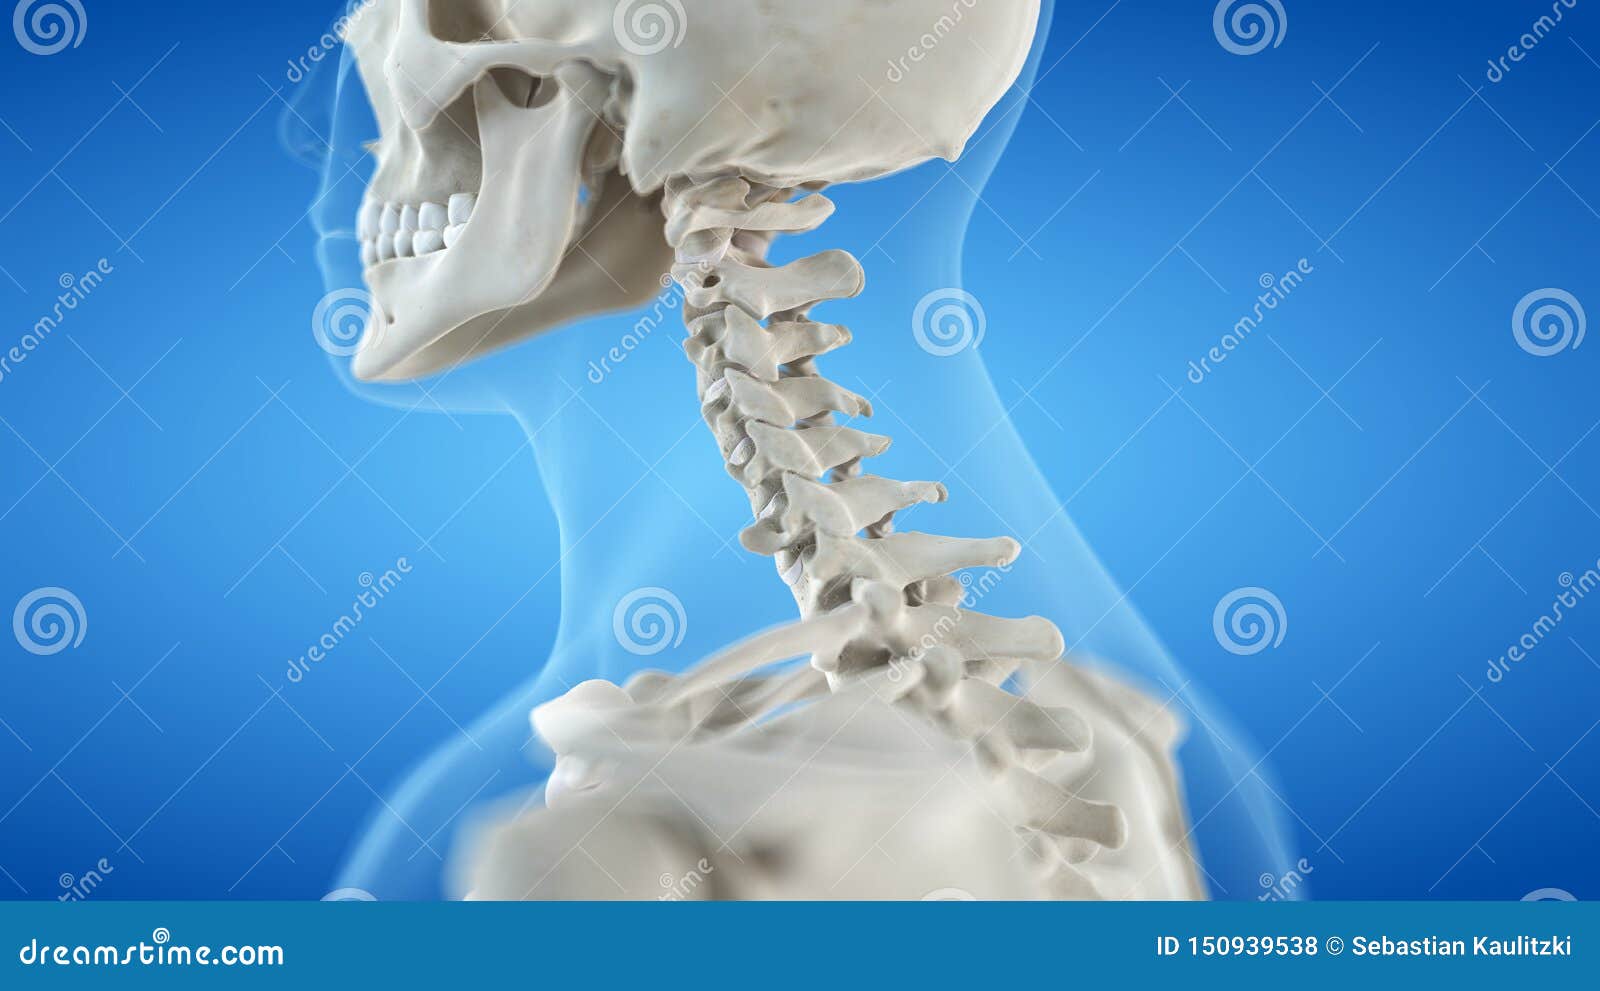 The cervical spine stock illustration. Illustration of therapy - 150939538